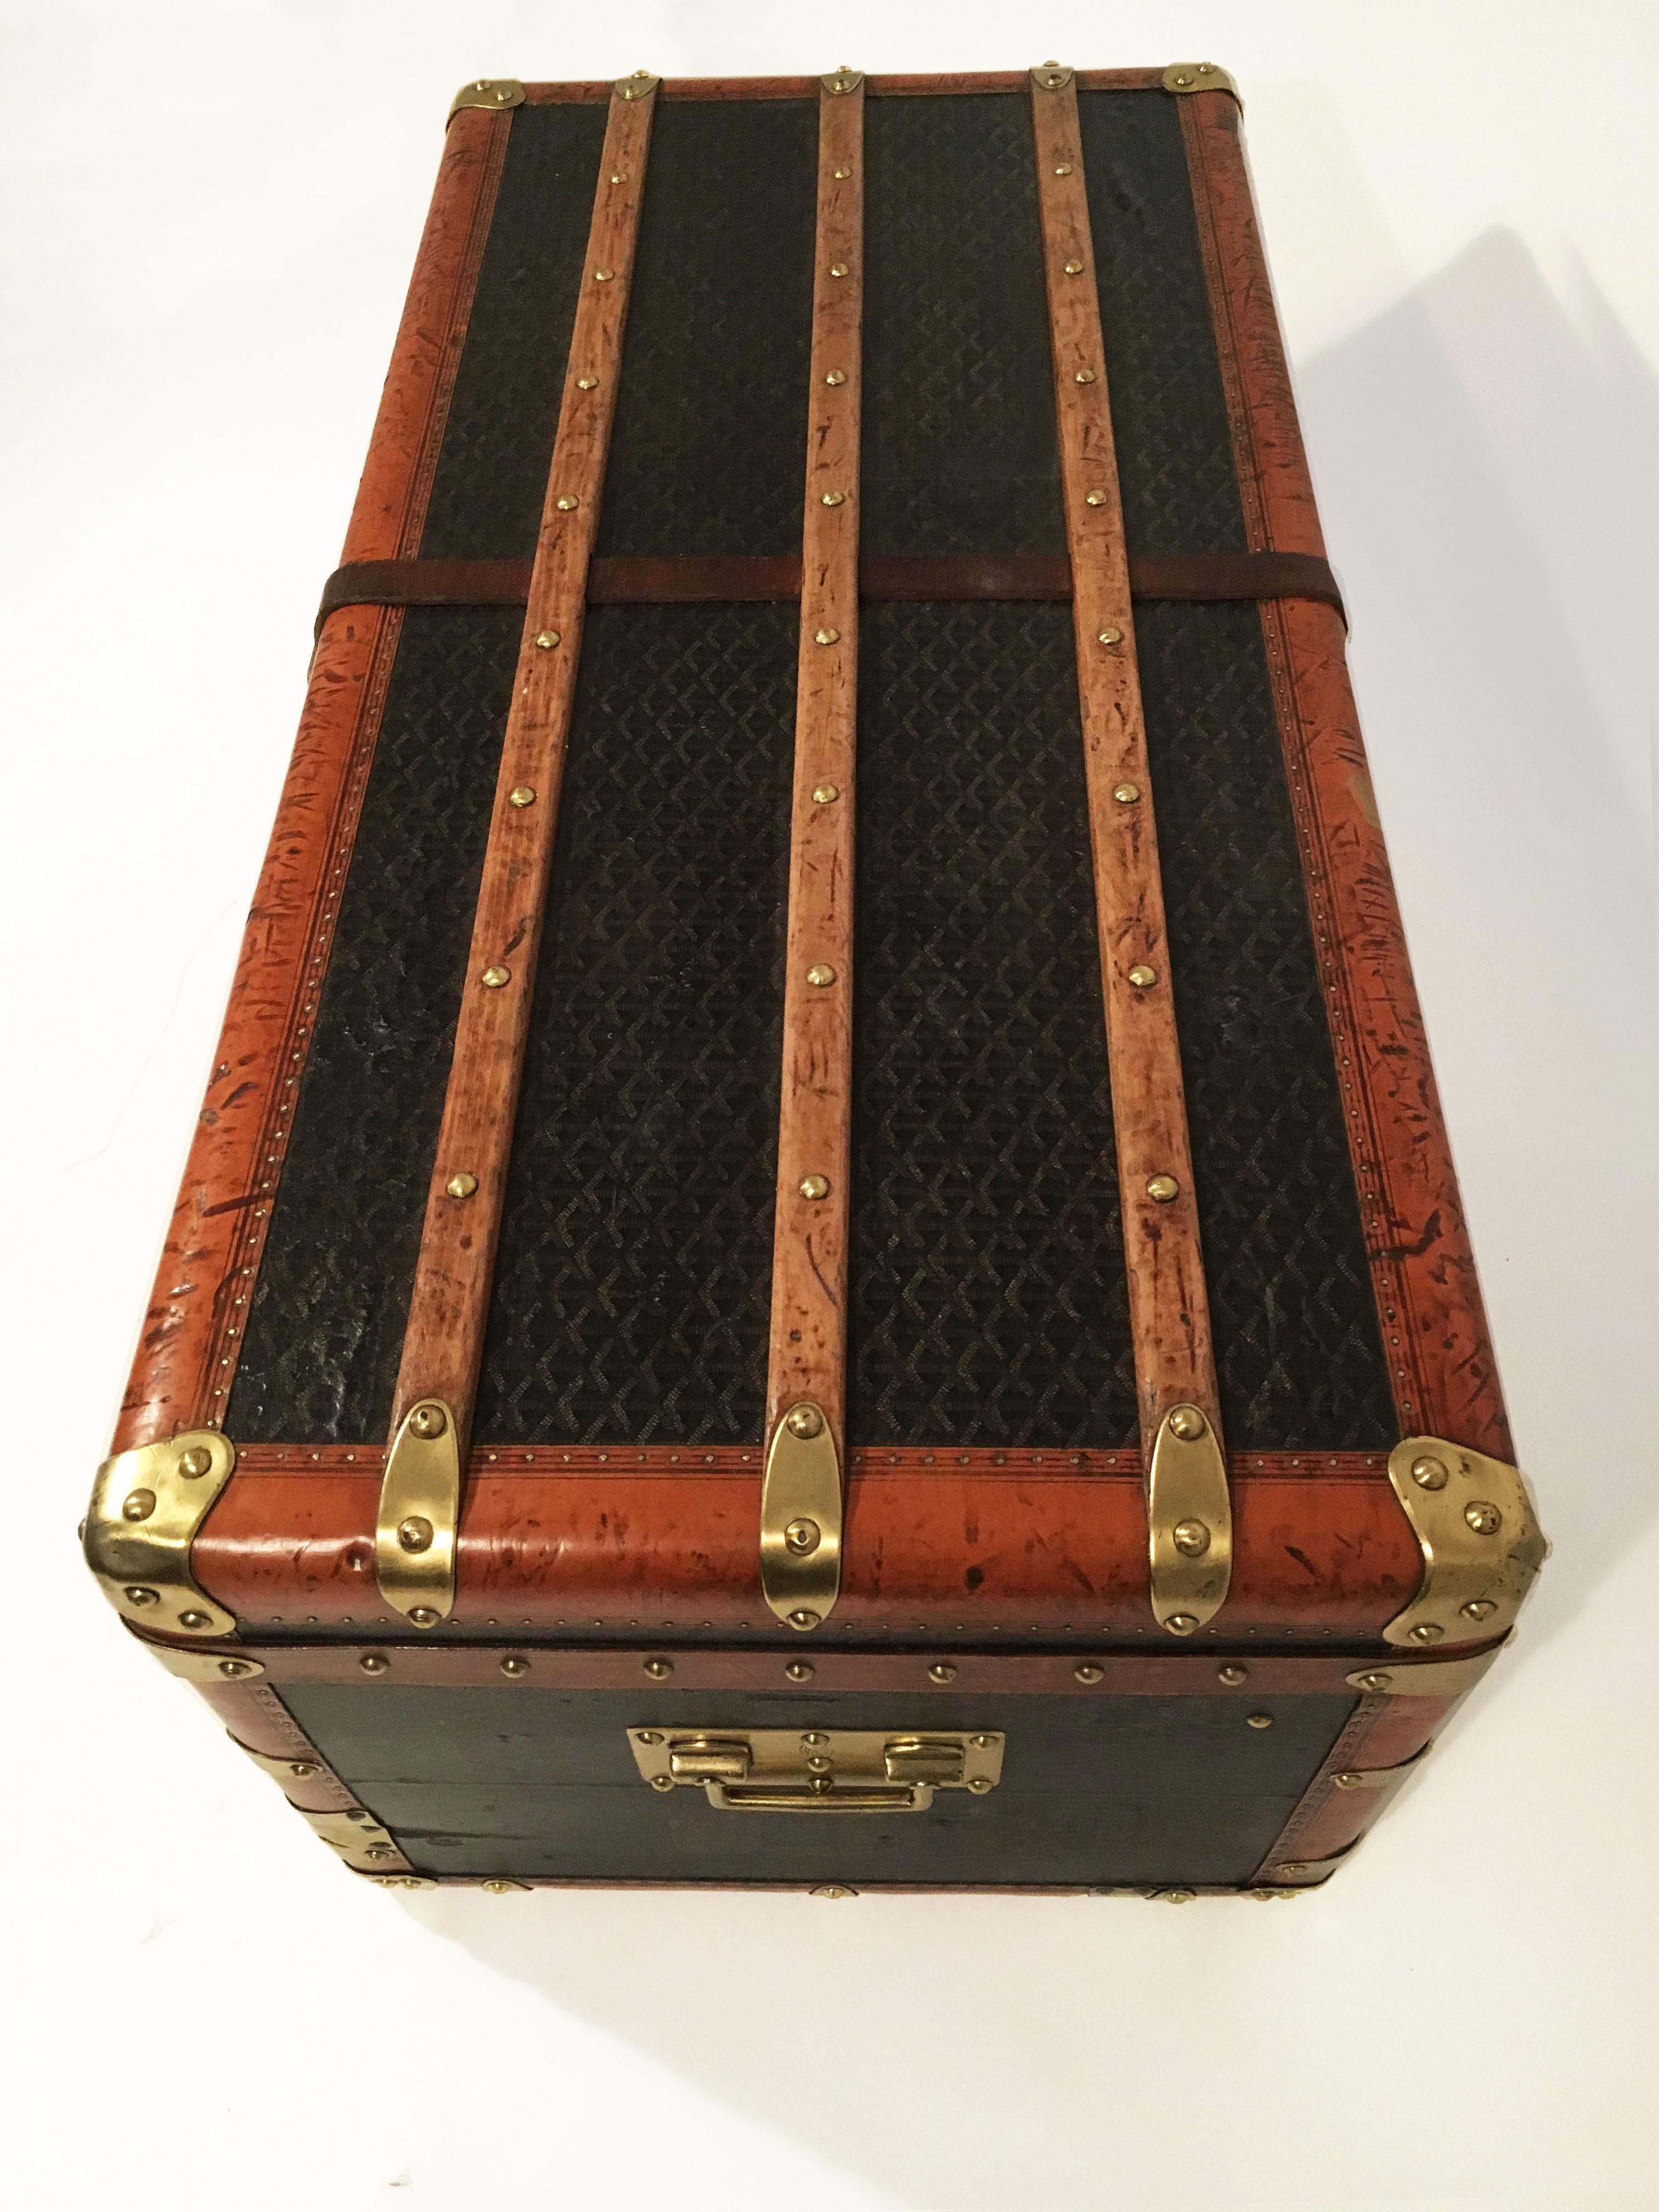 Goyard Steamer Trunk from the Princely House of Thurn and Taxis In Good Condition For Sale In Vienna, Vienna